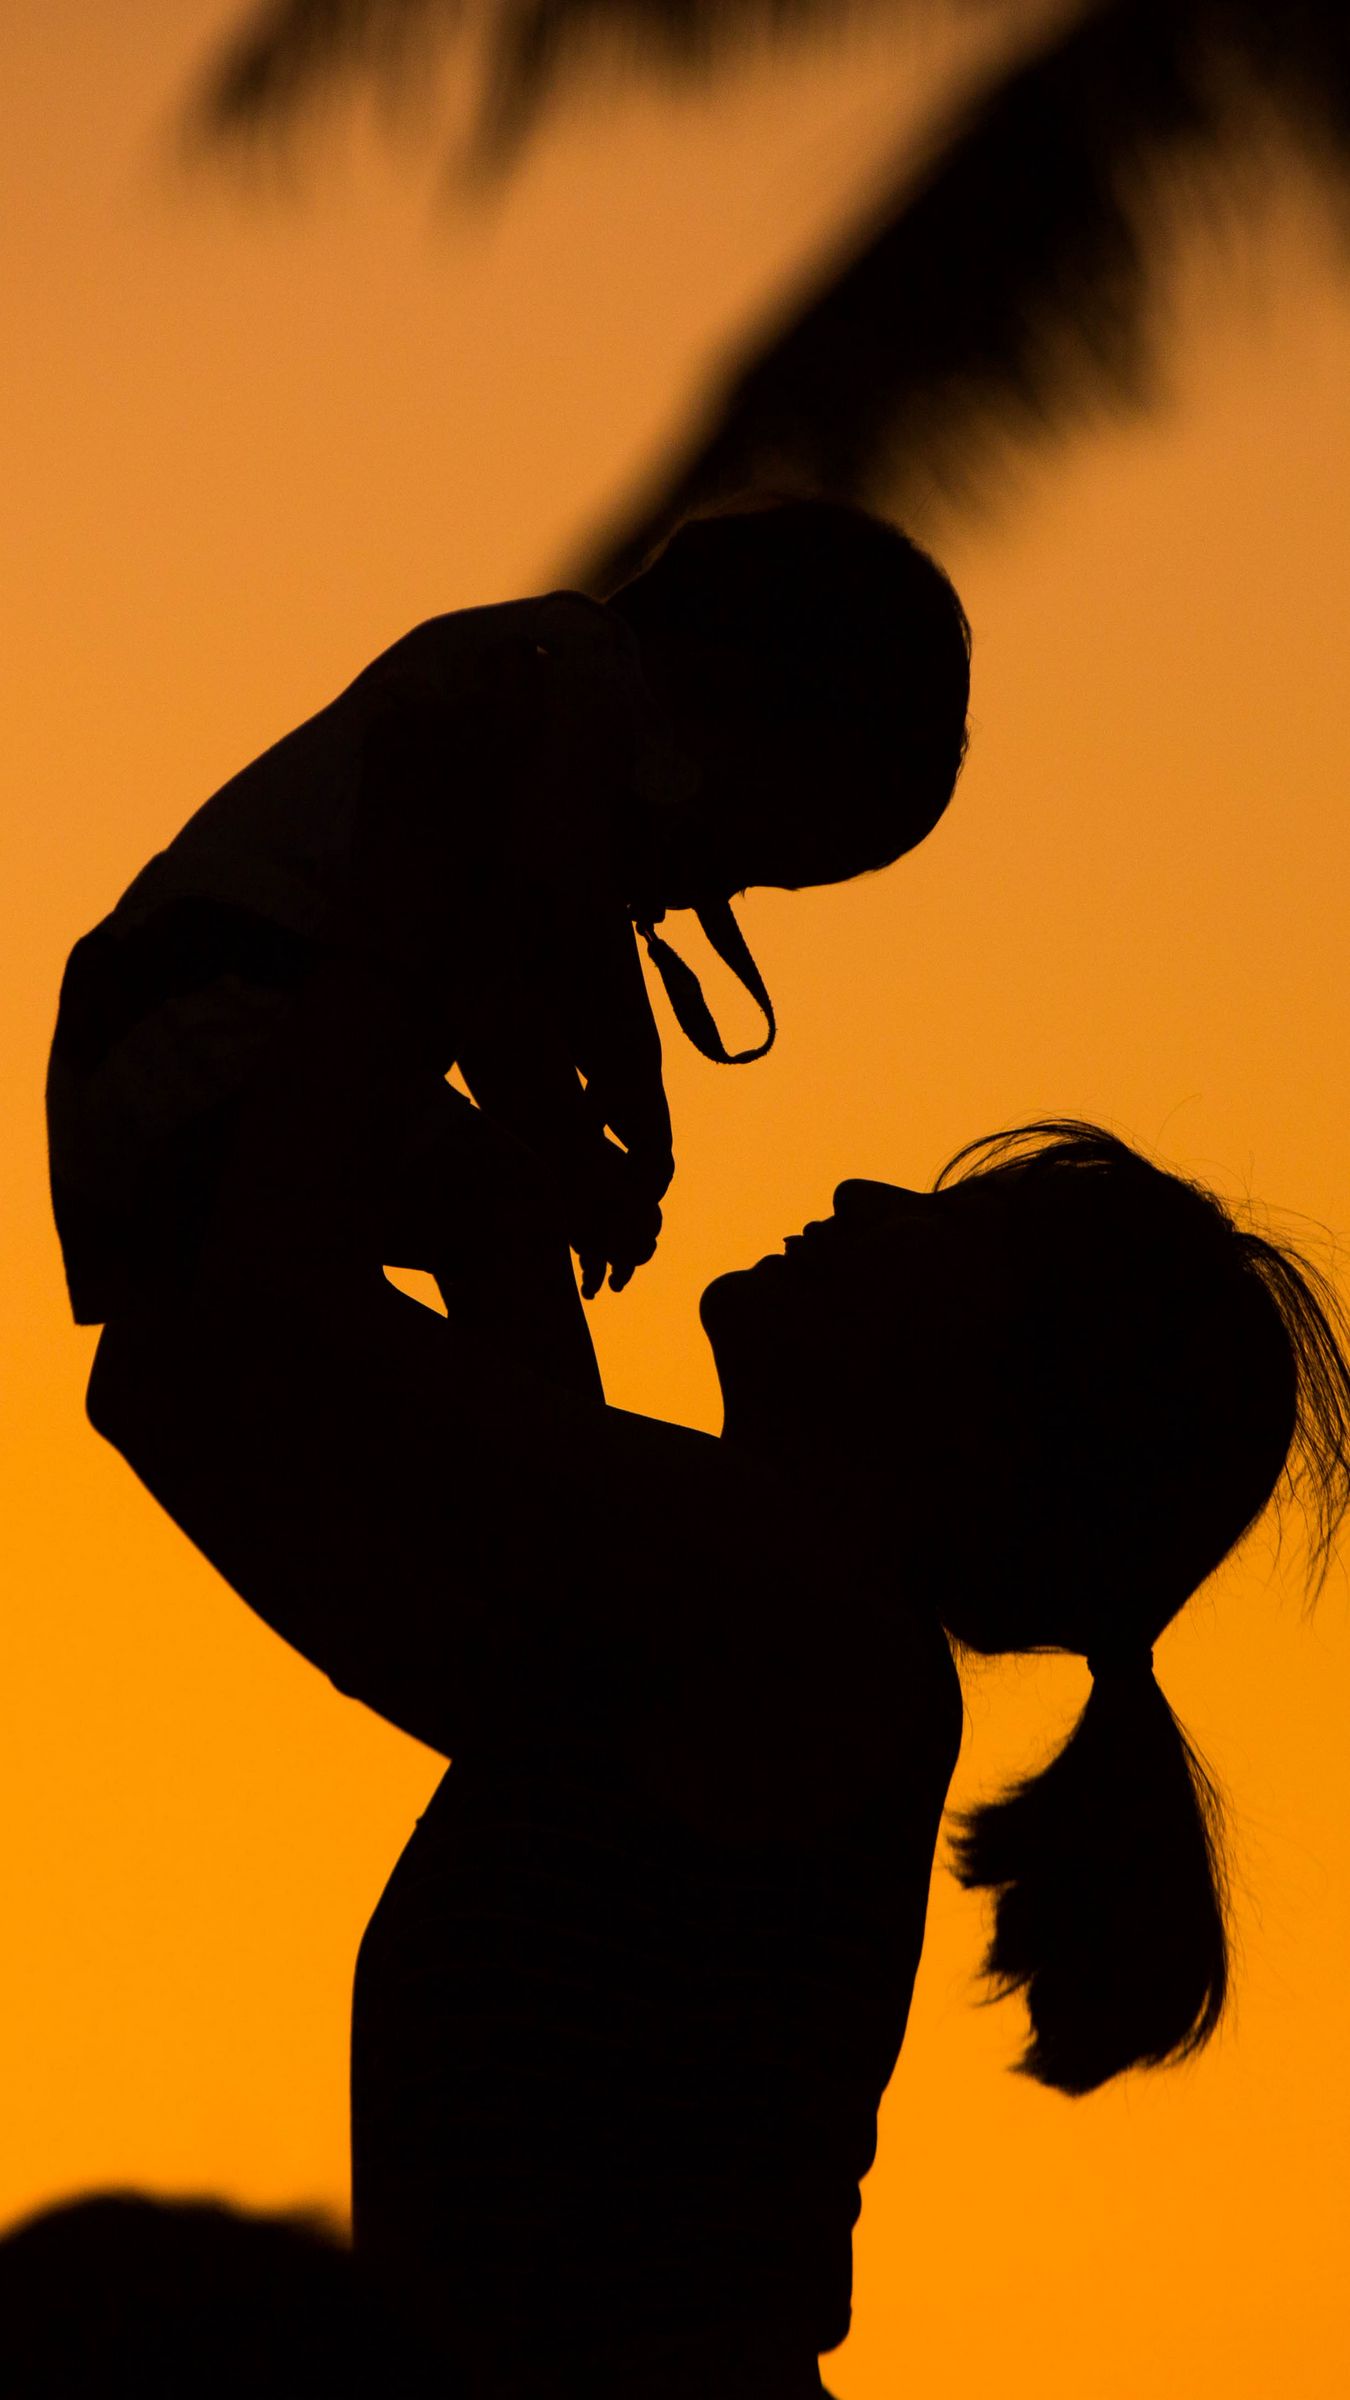 Download wallpaper 1350x2400 silhouettes, mother, child, sunset iphone  8+/7+/6s+/6+ for parallax hd background